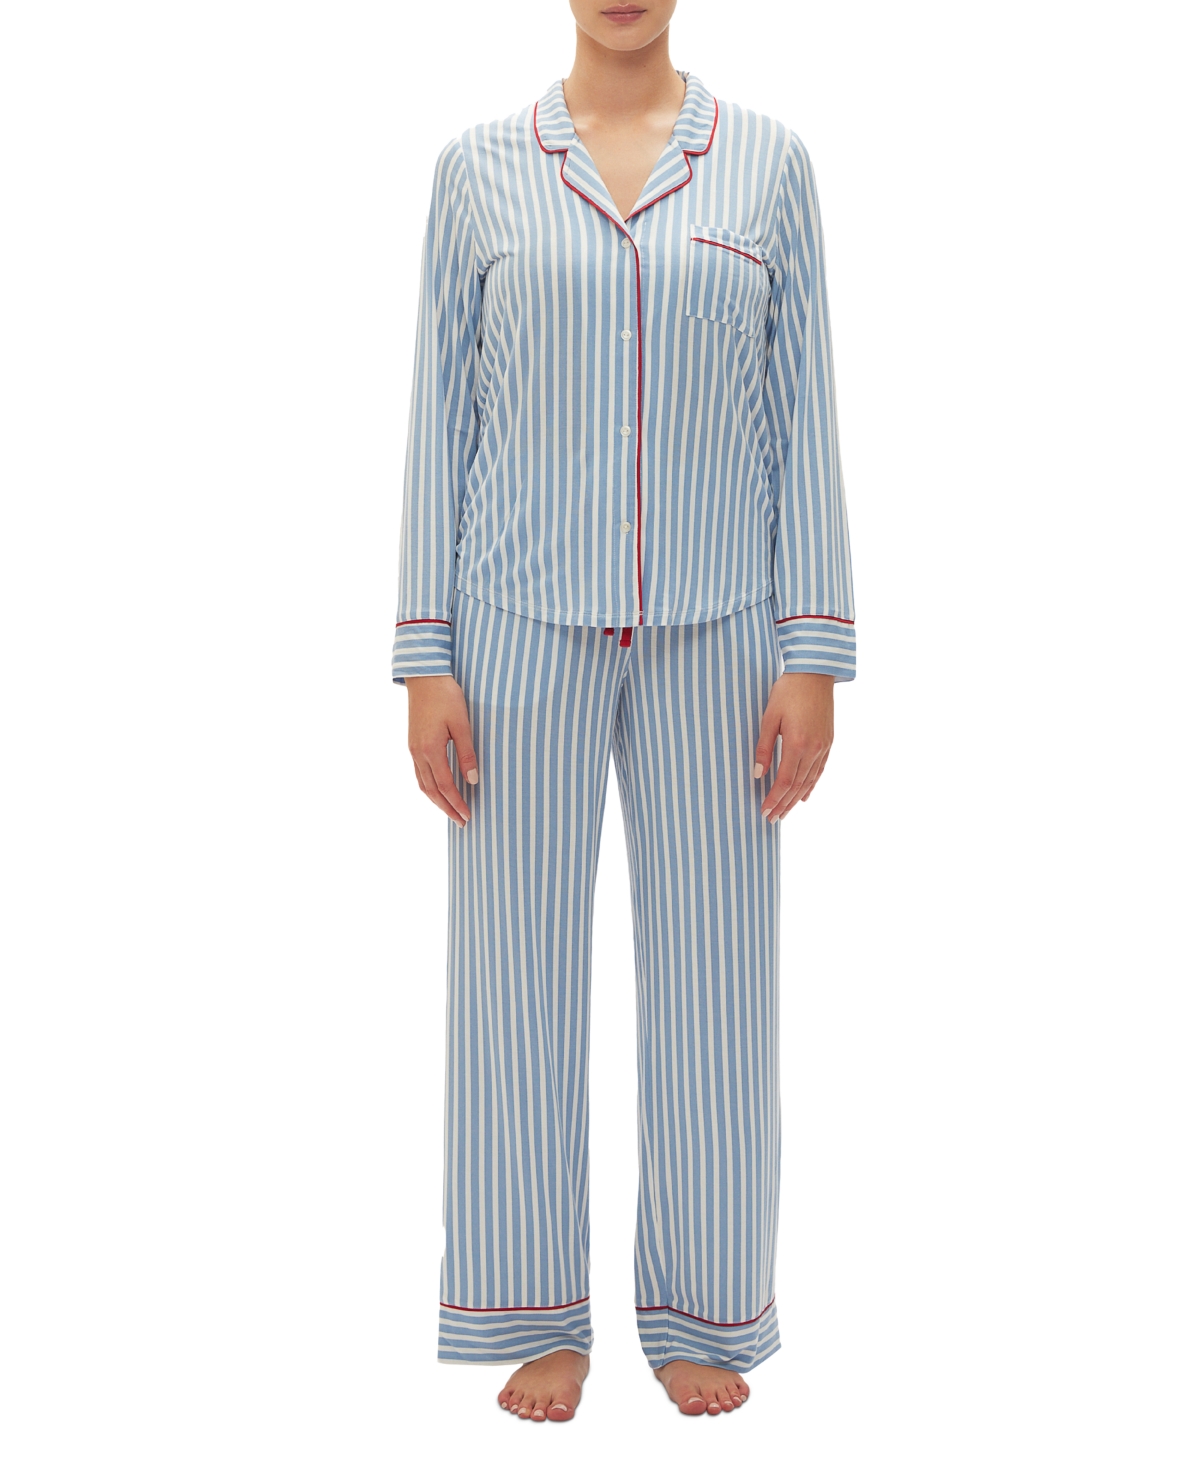 Gap Body Women's 2-pc. Notched-collar Long-sleeve Pajamas Set In Blue And White Stripe